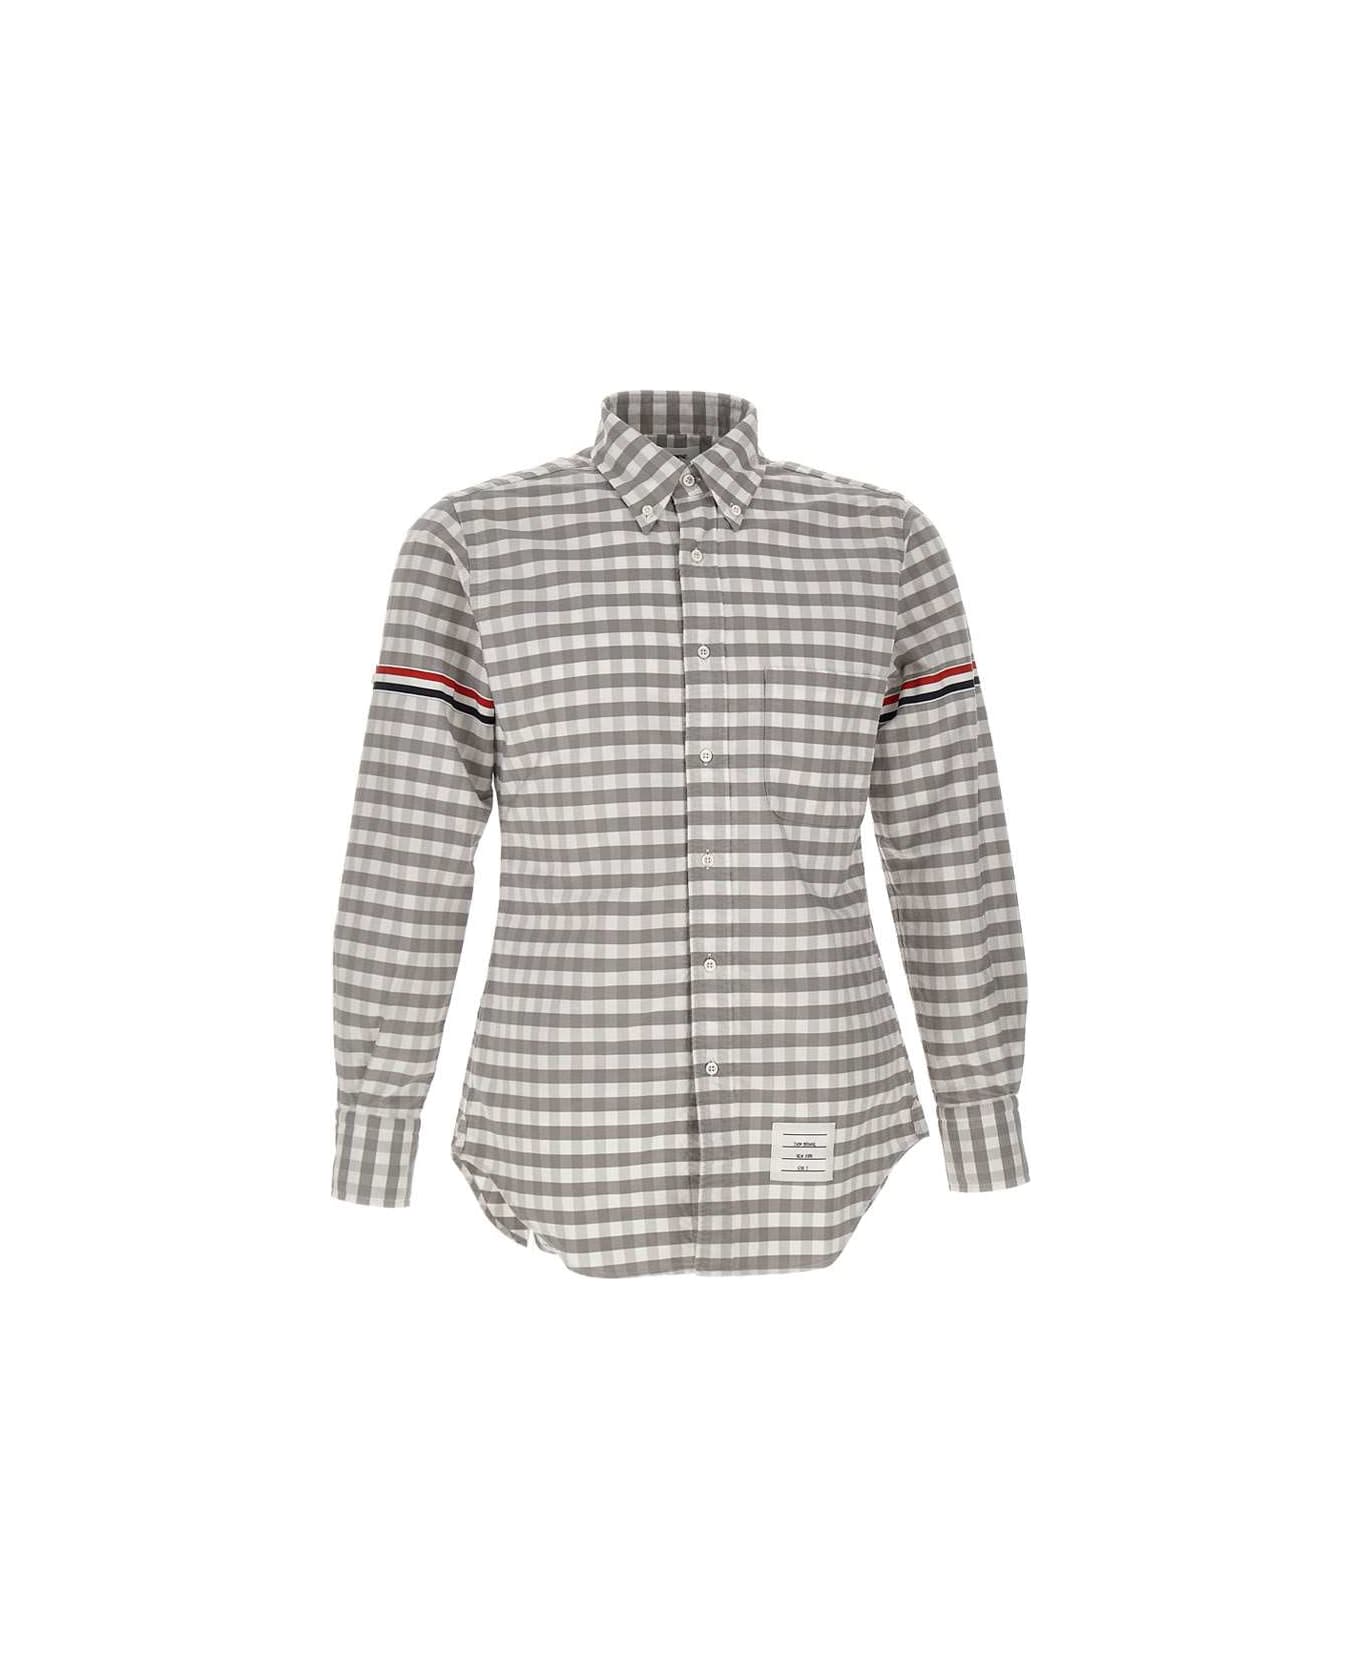 Thom Browne Cotton 'classic Fit Shirt Check Oxford' - Grey